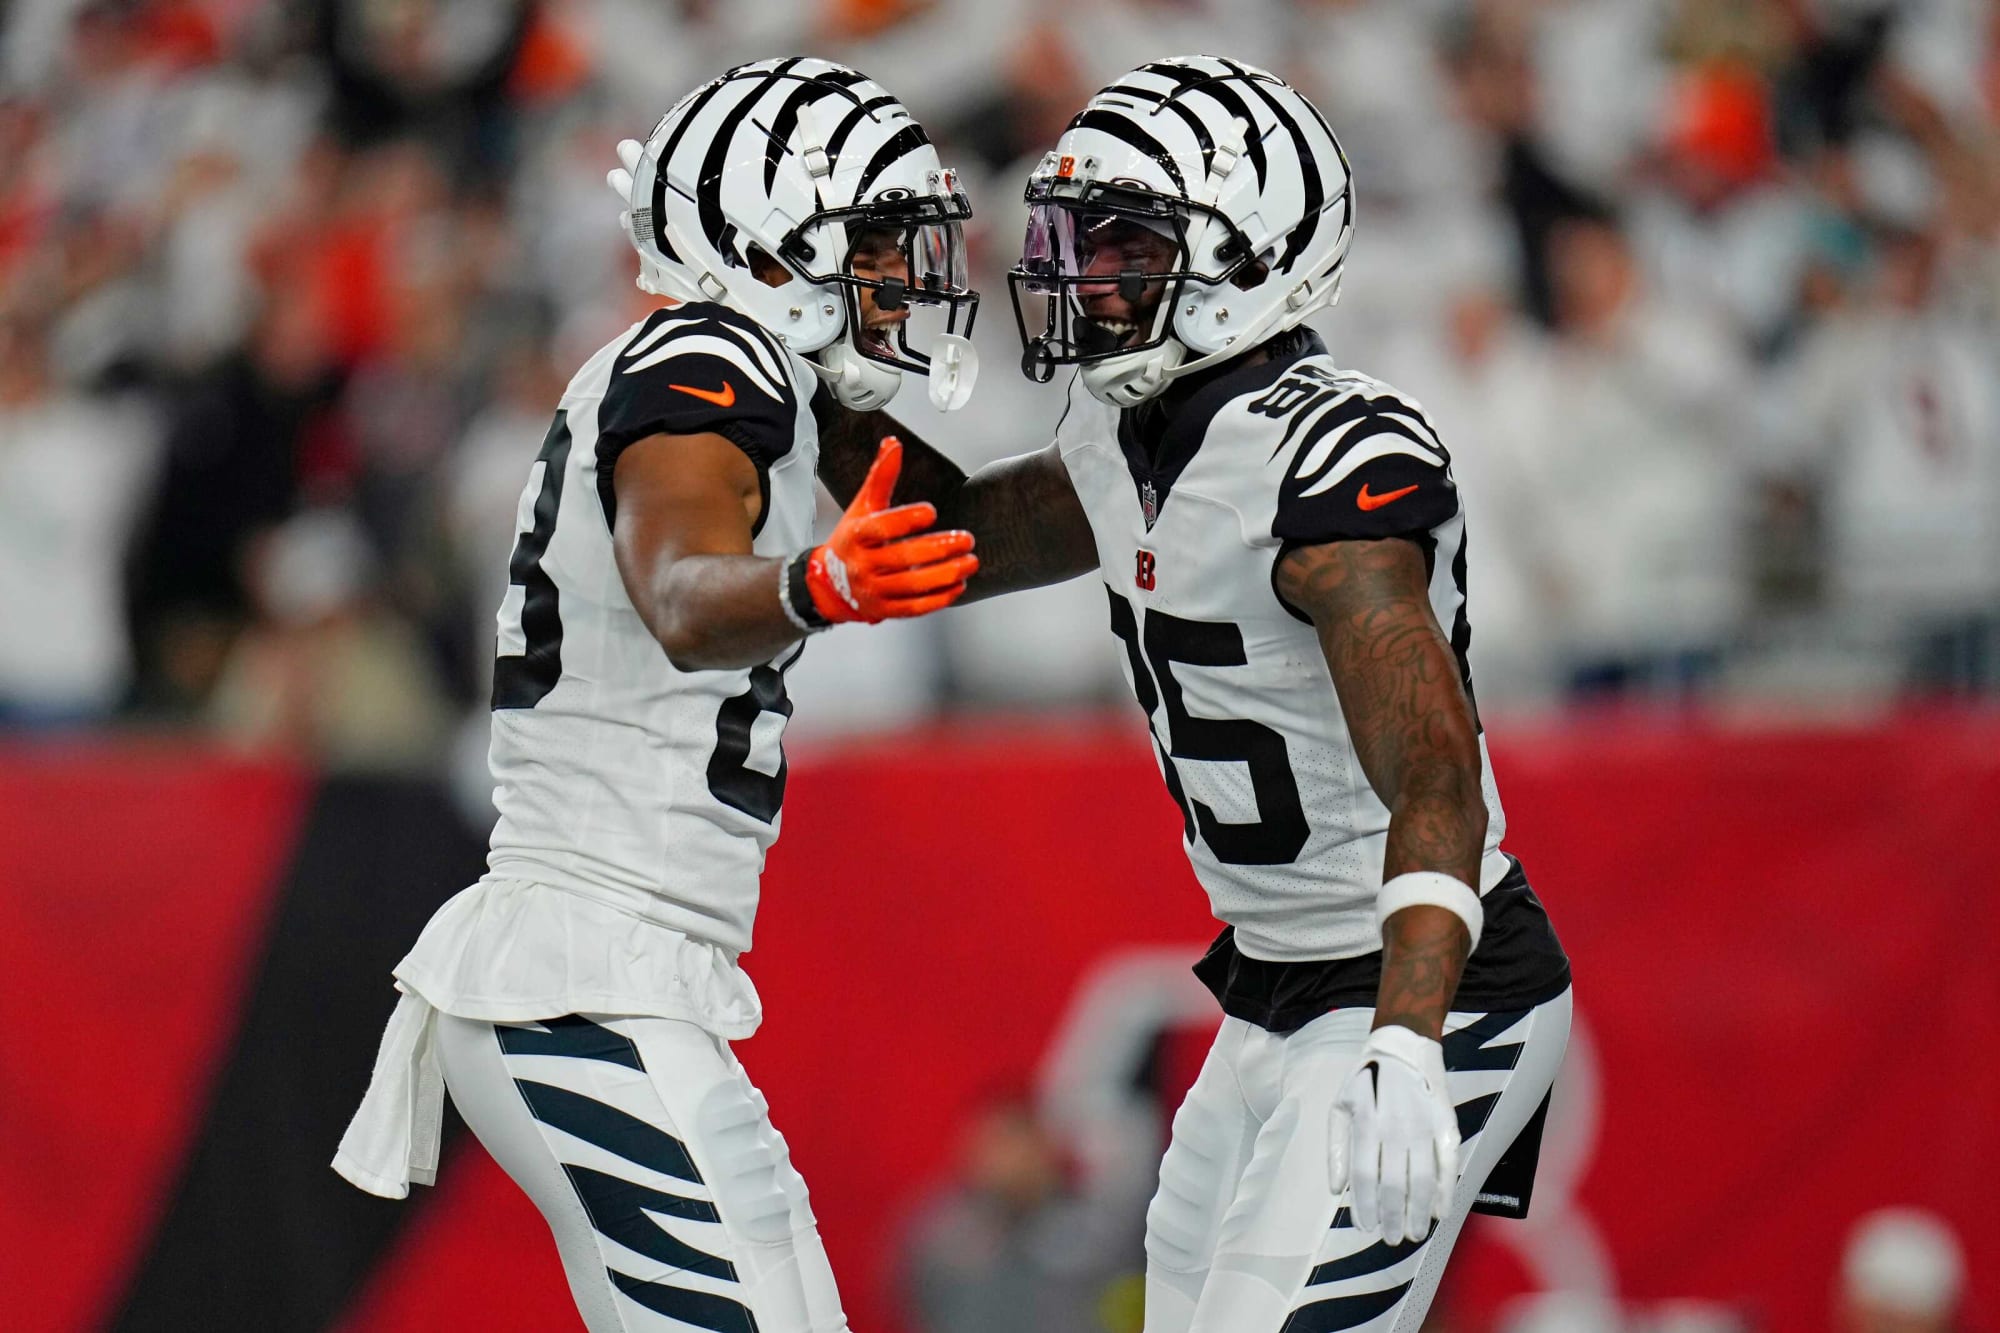 Bengals receiver thinks Chiefs got lucky with AFC Championship win